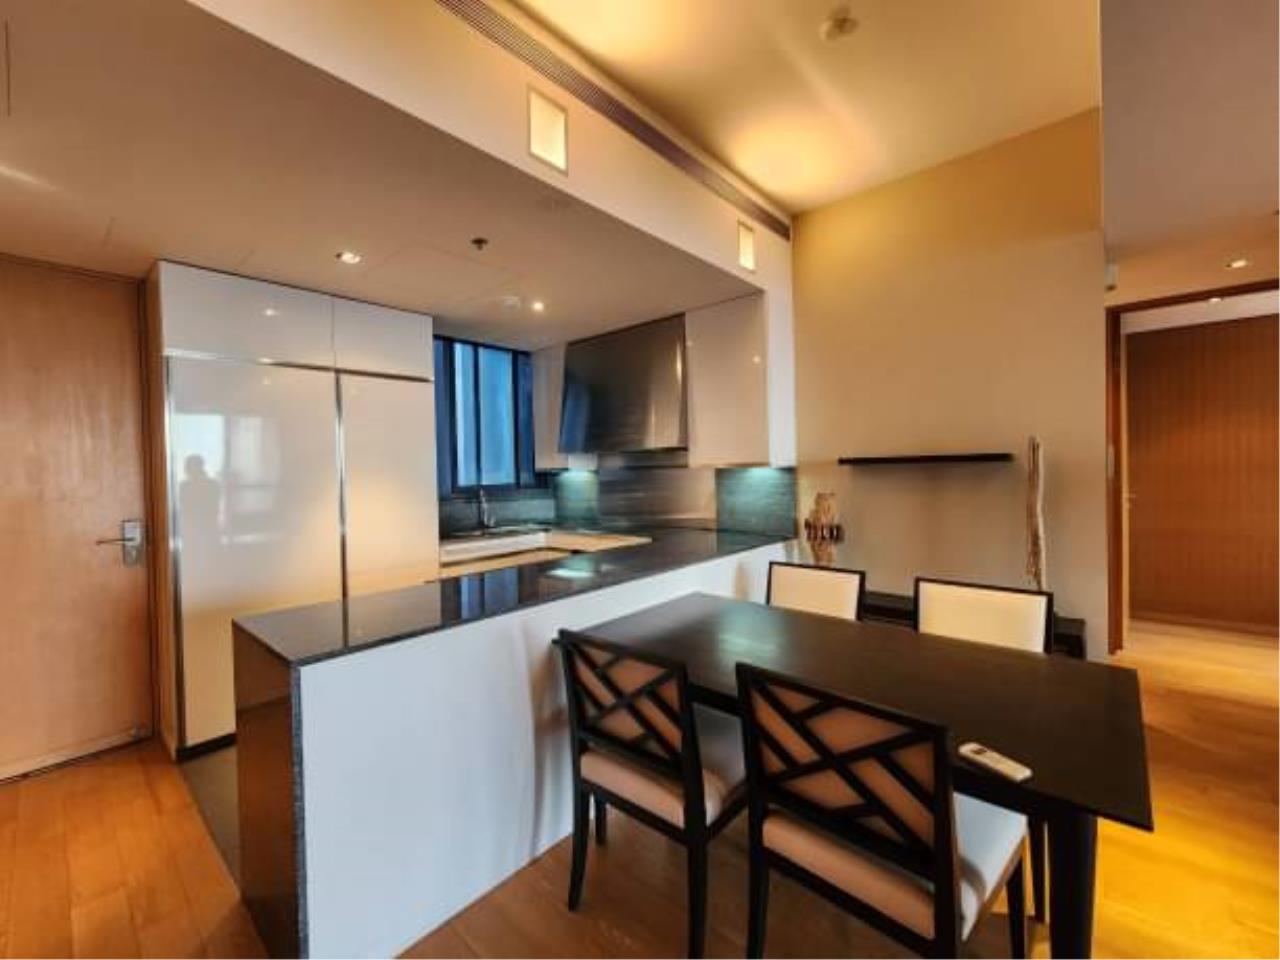 2 Bedrooms, 2 Bathrooms Size 93.22sqm. The MET Sathorn For Rent 65,000 THB & For Sale 17.1MTHB